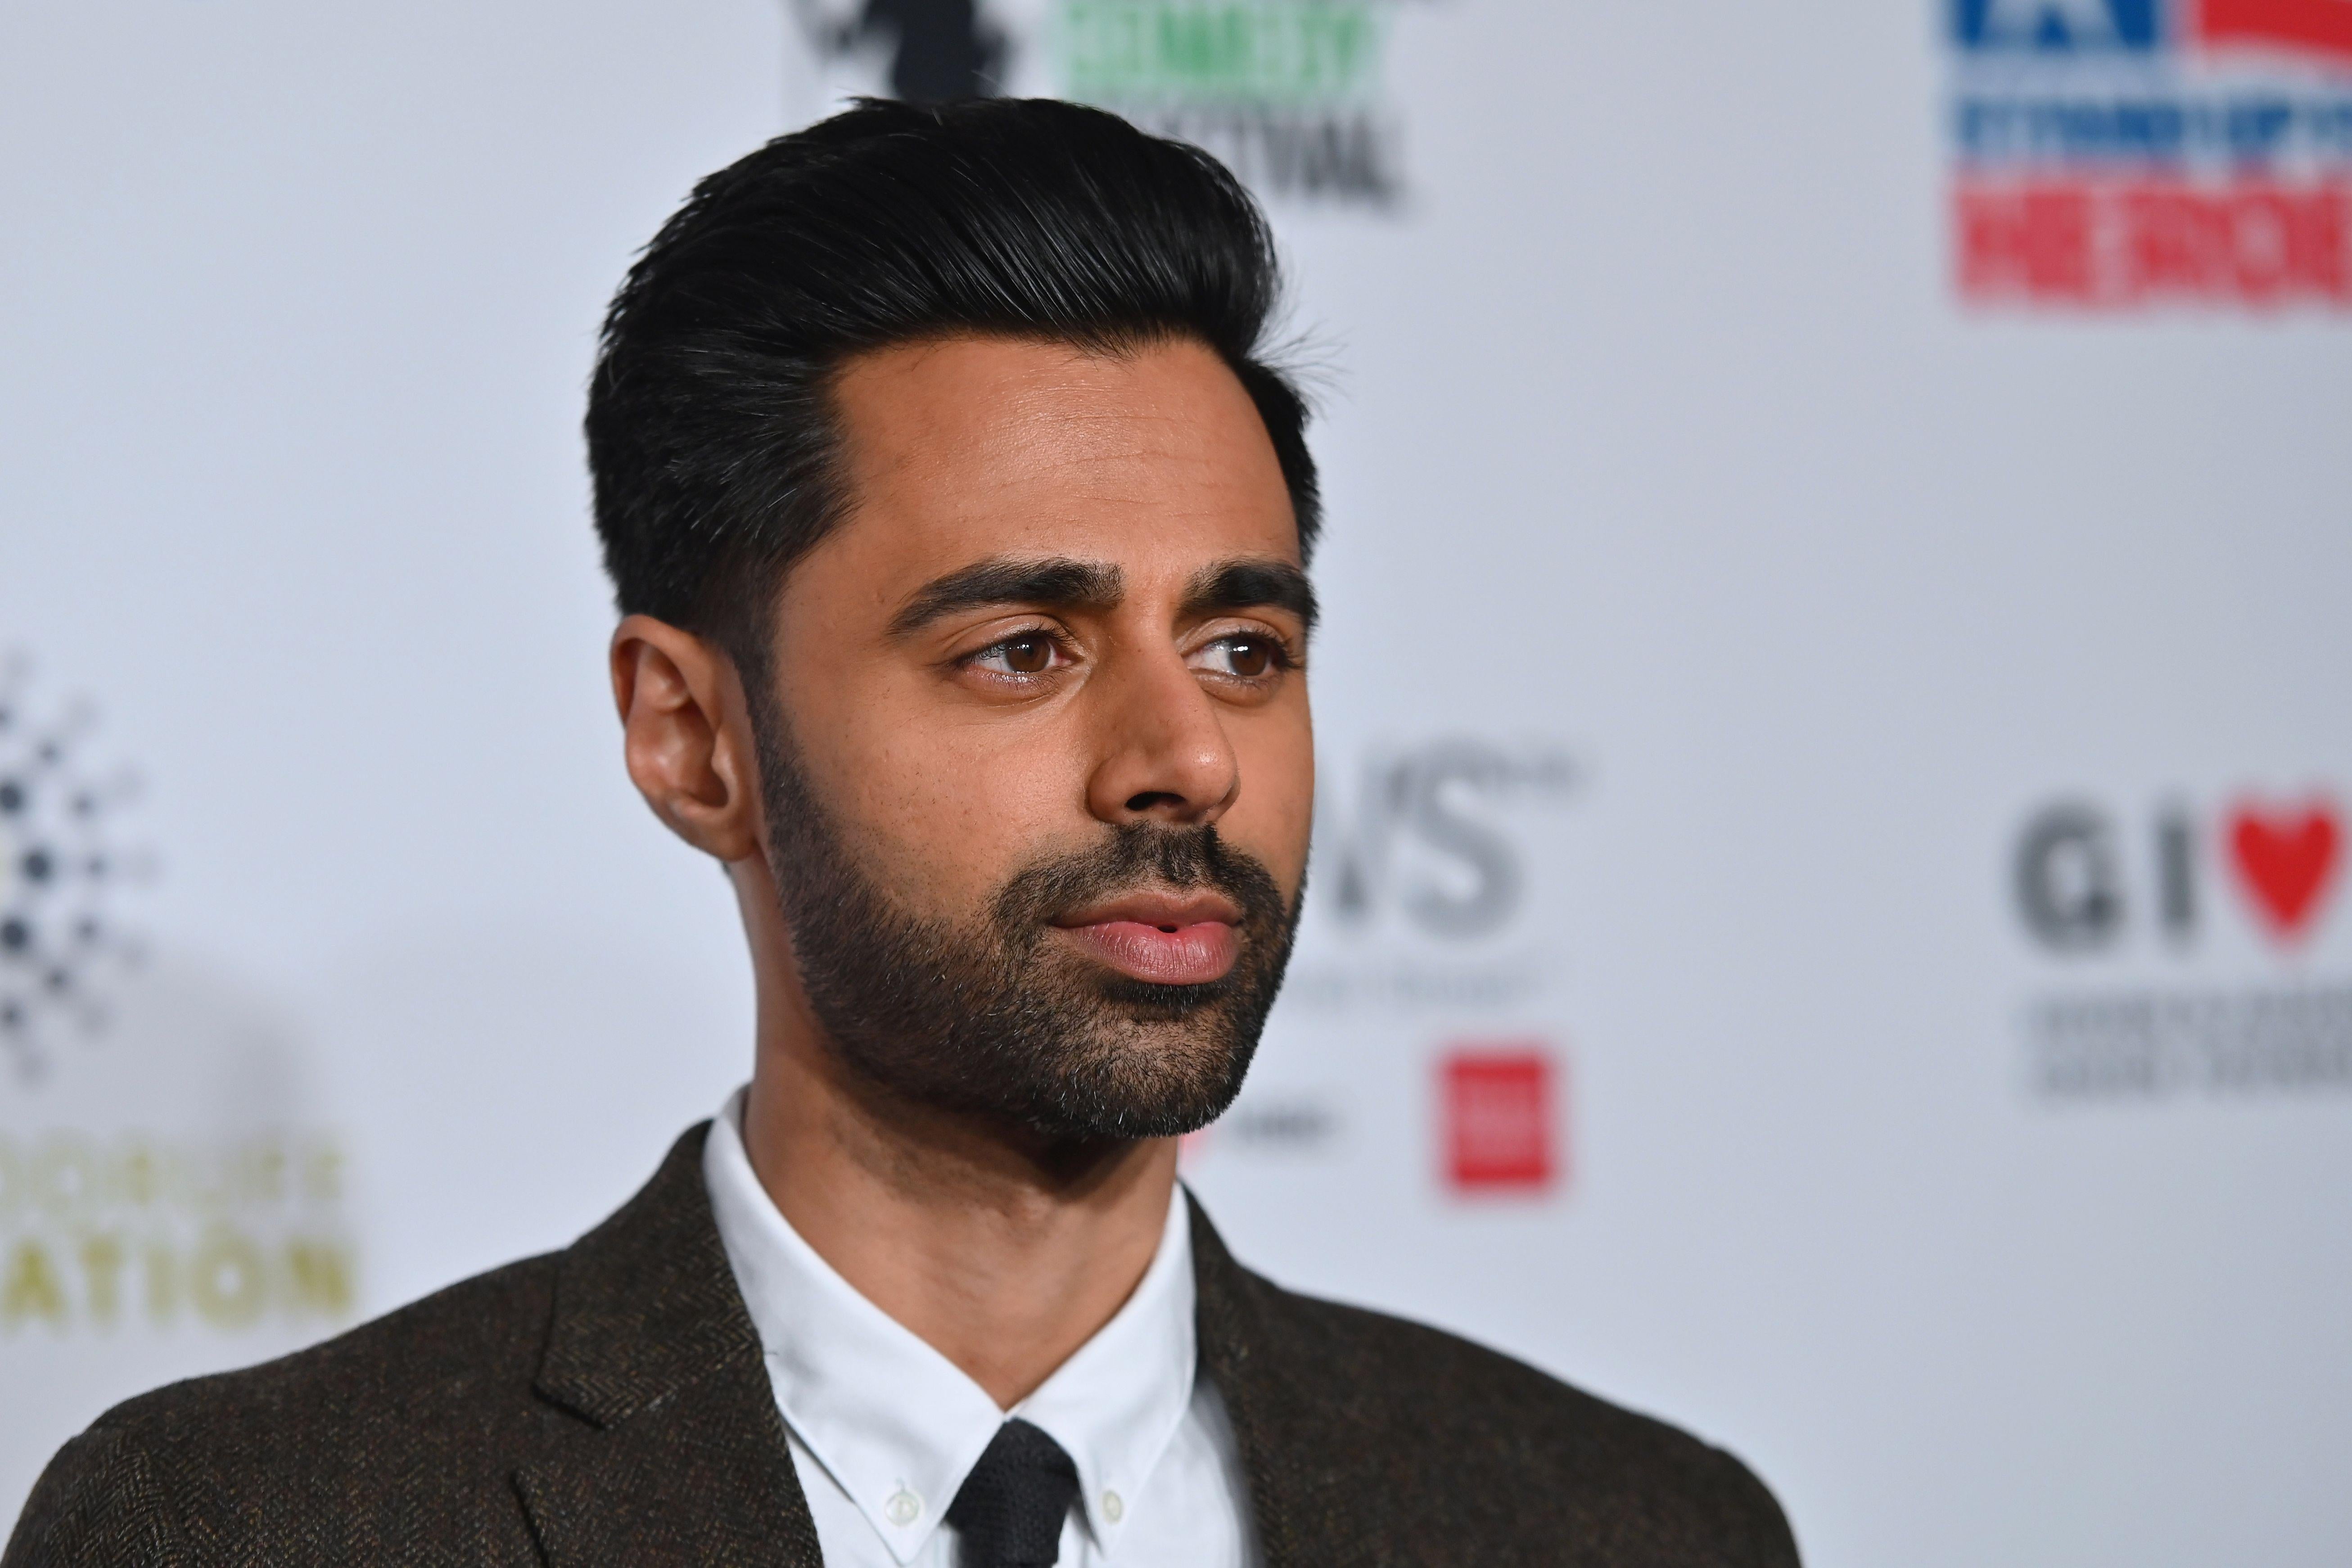 The Slatest for Sept. 19: What’s So Maddening About Hasan Minhaj’s “Emotional Truths” Slate Staff